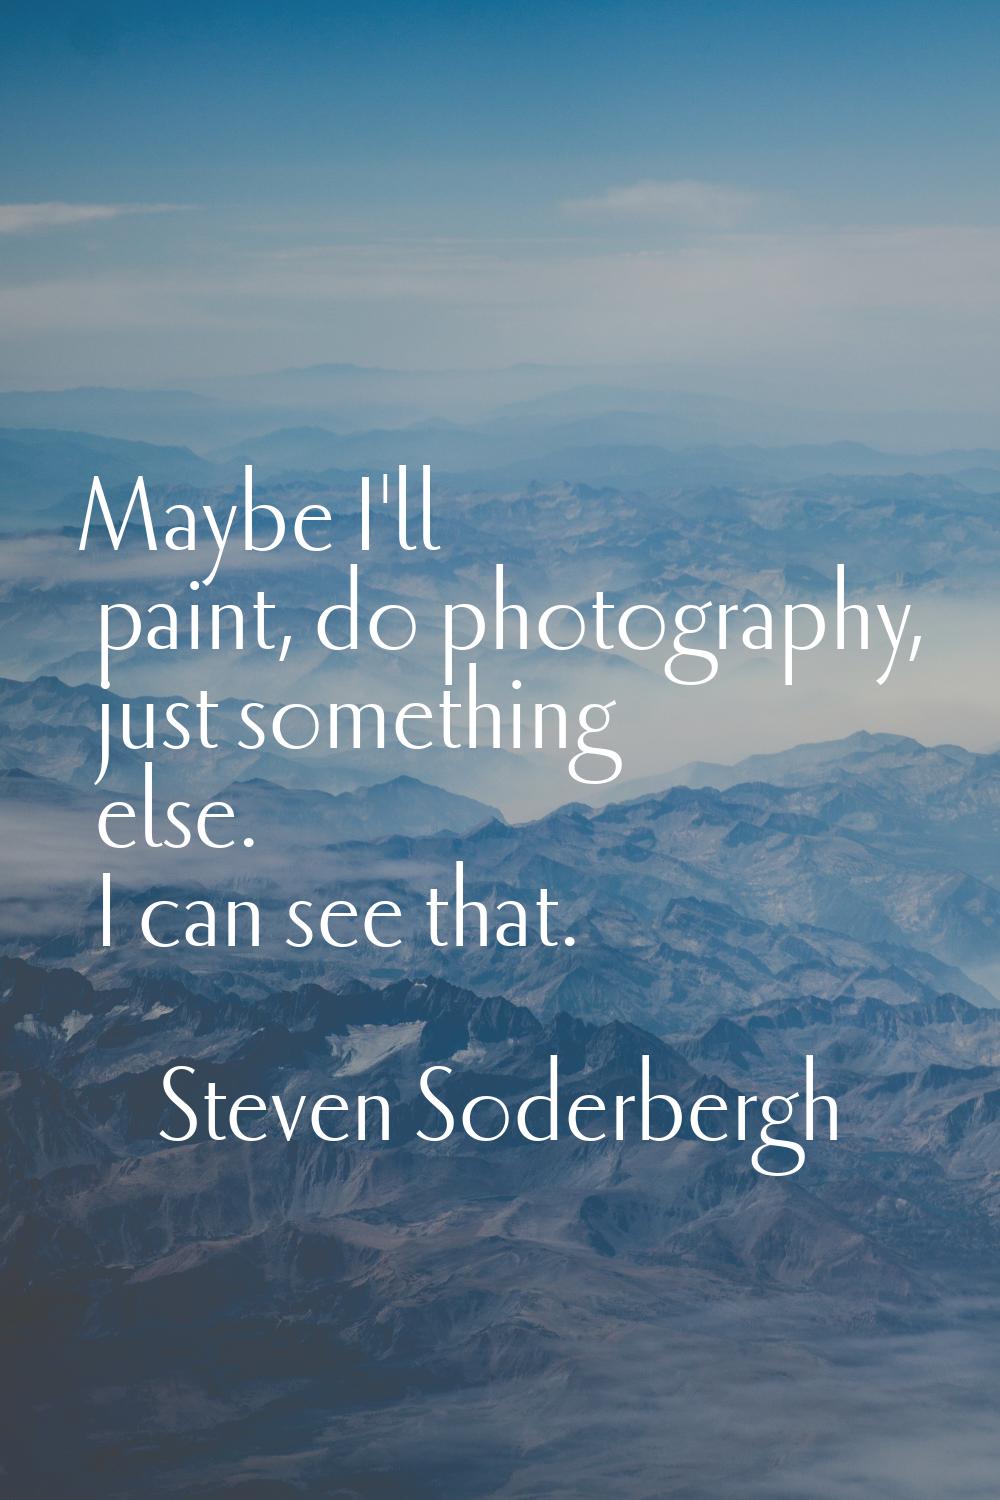 Maybe I'll paint, do photography, just something else. I can see that.